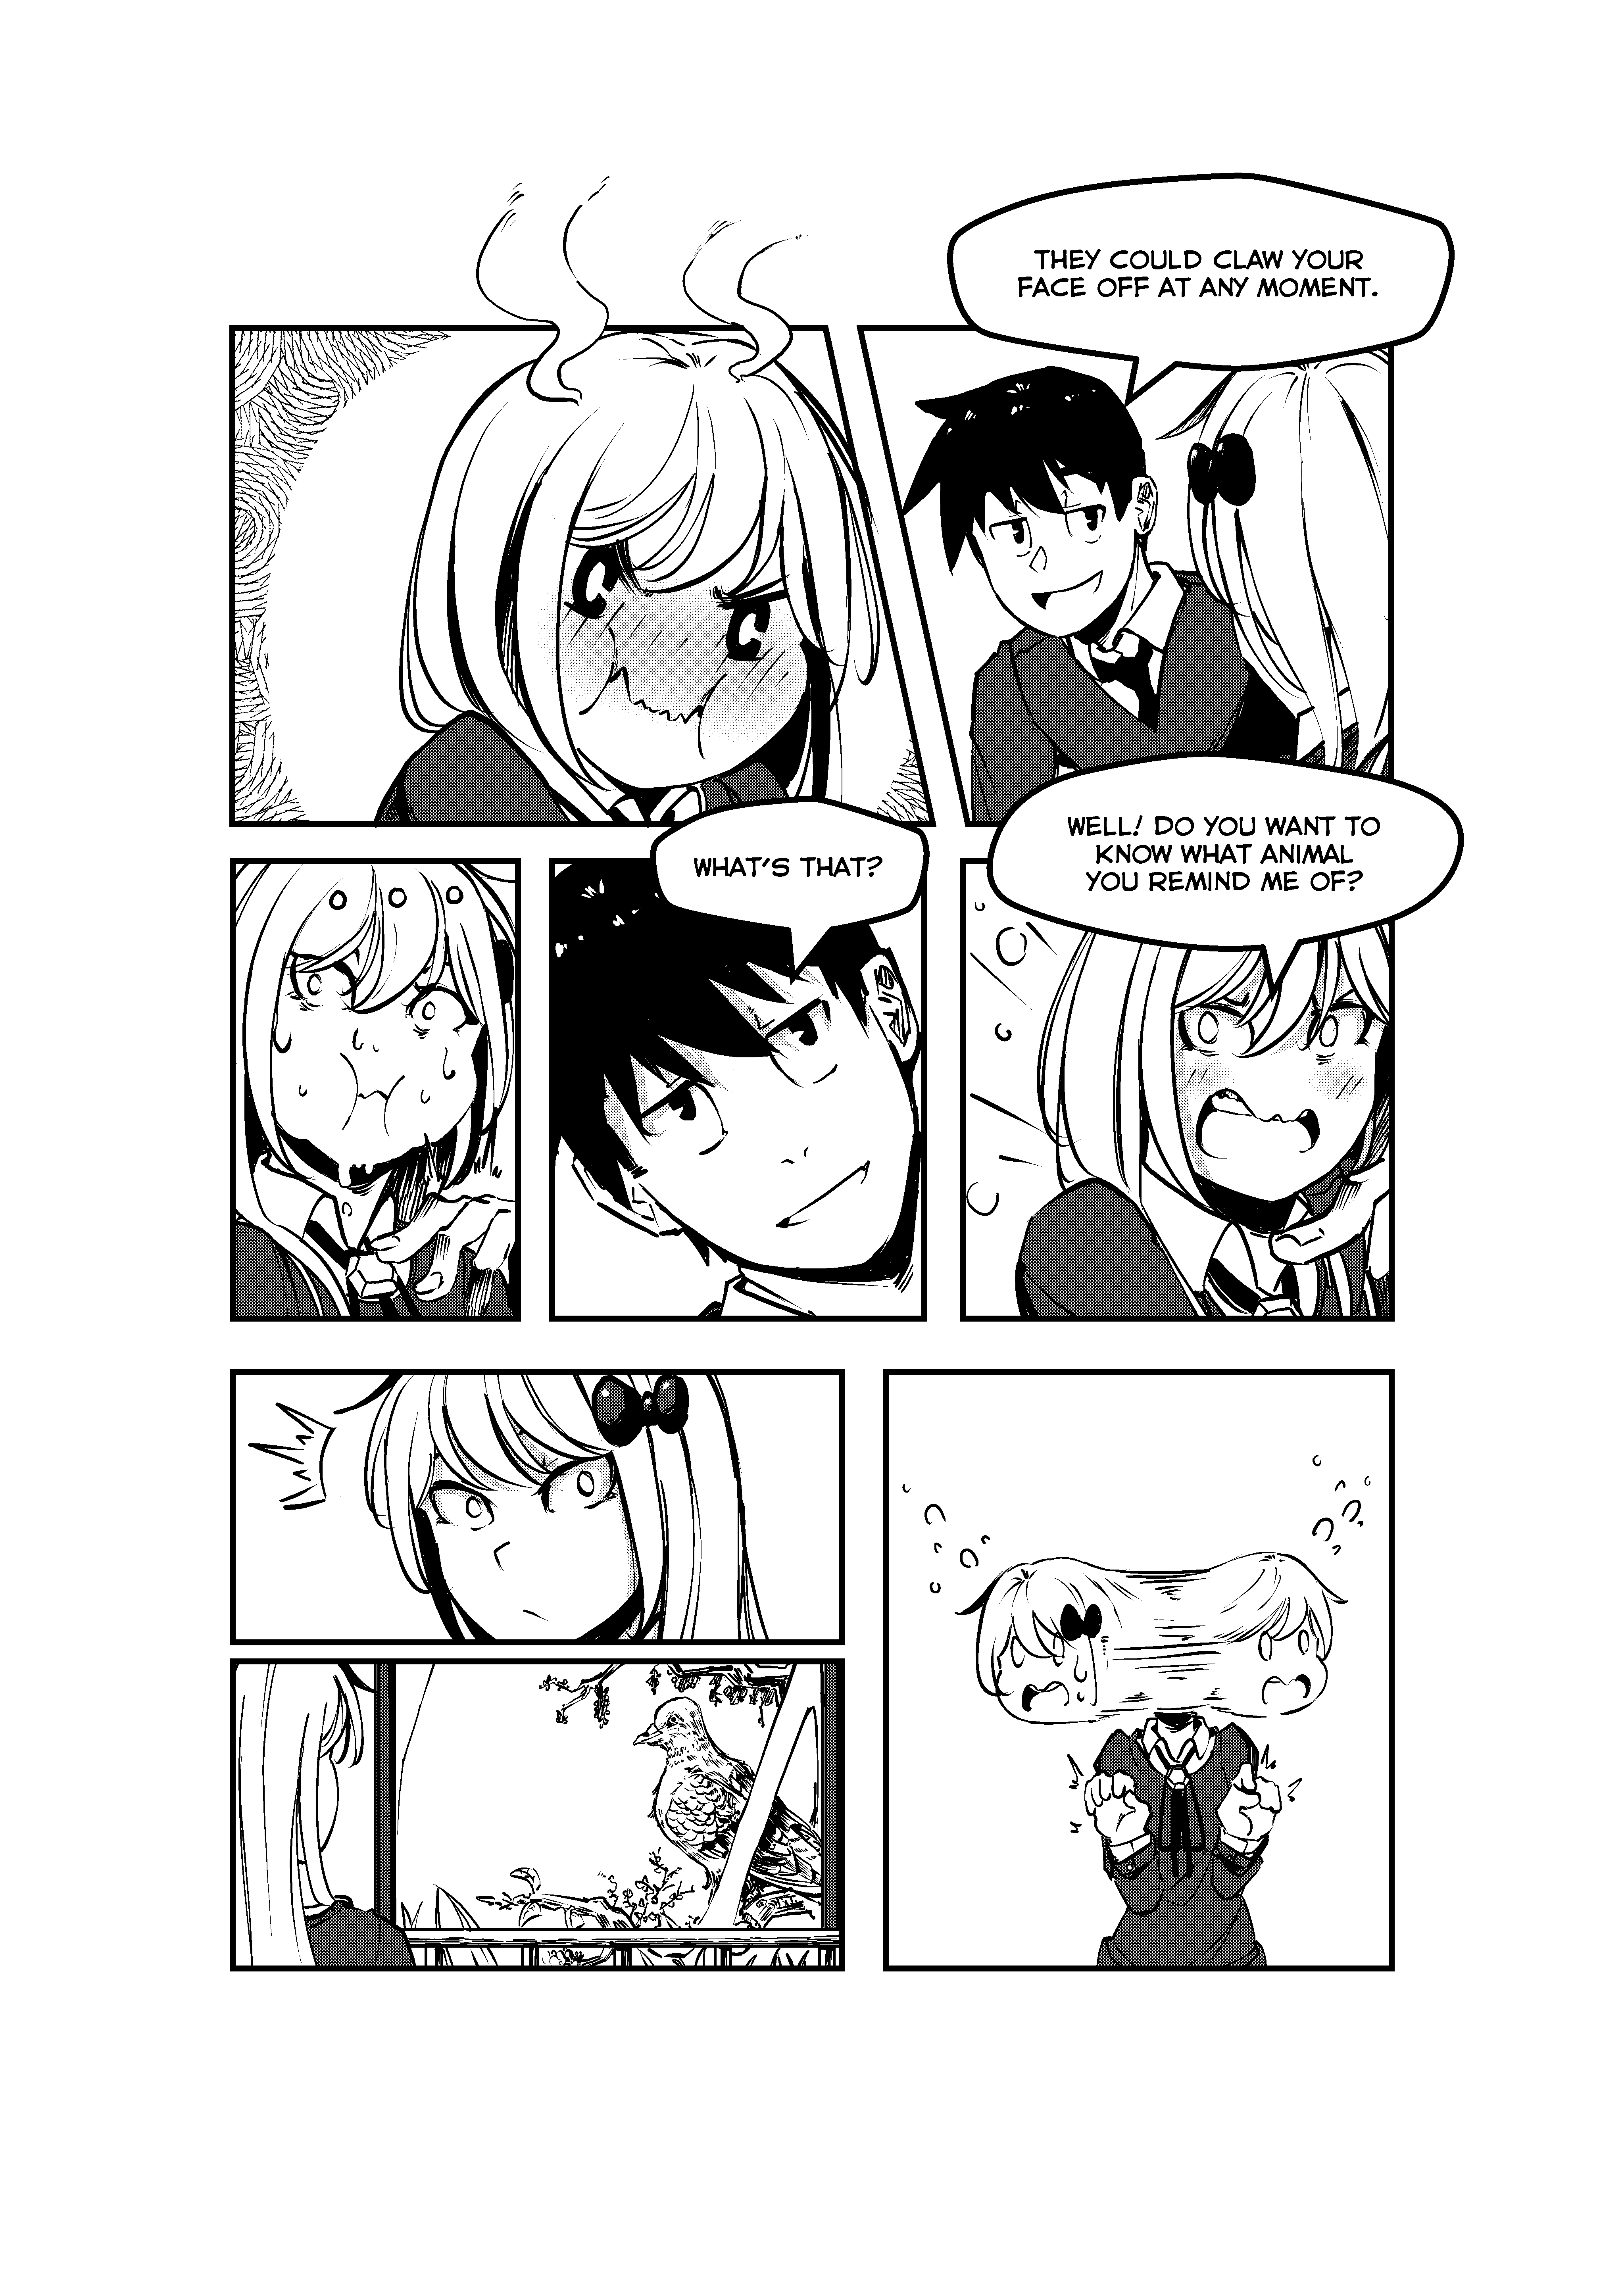 Opposites In Disguise - 20 page 32-464b70ed